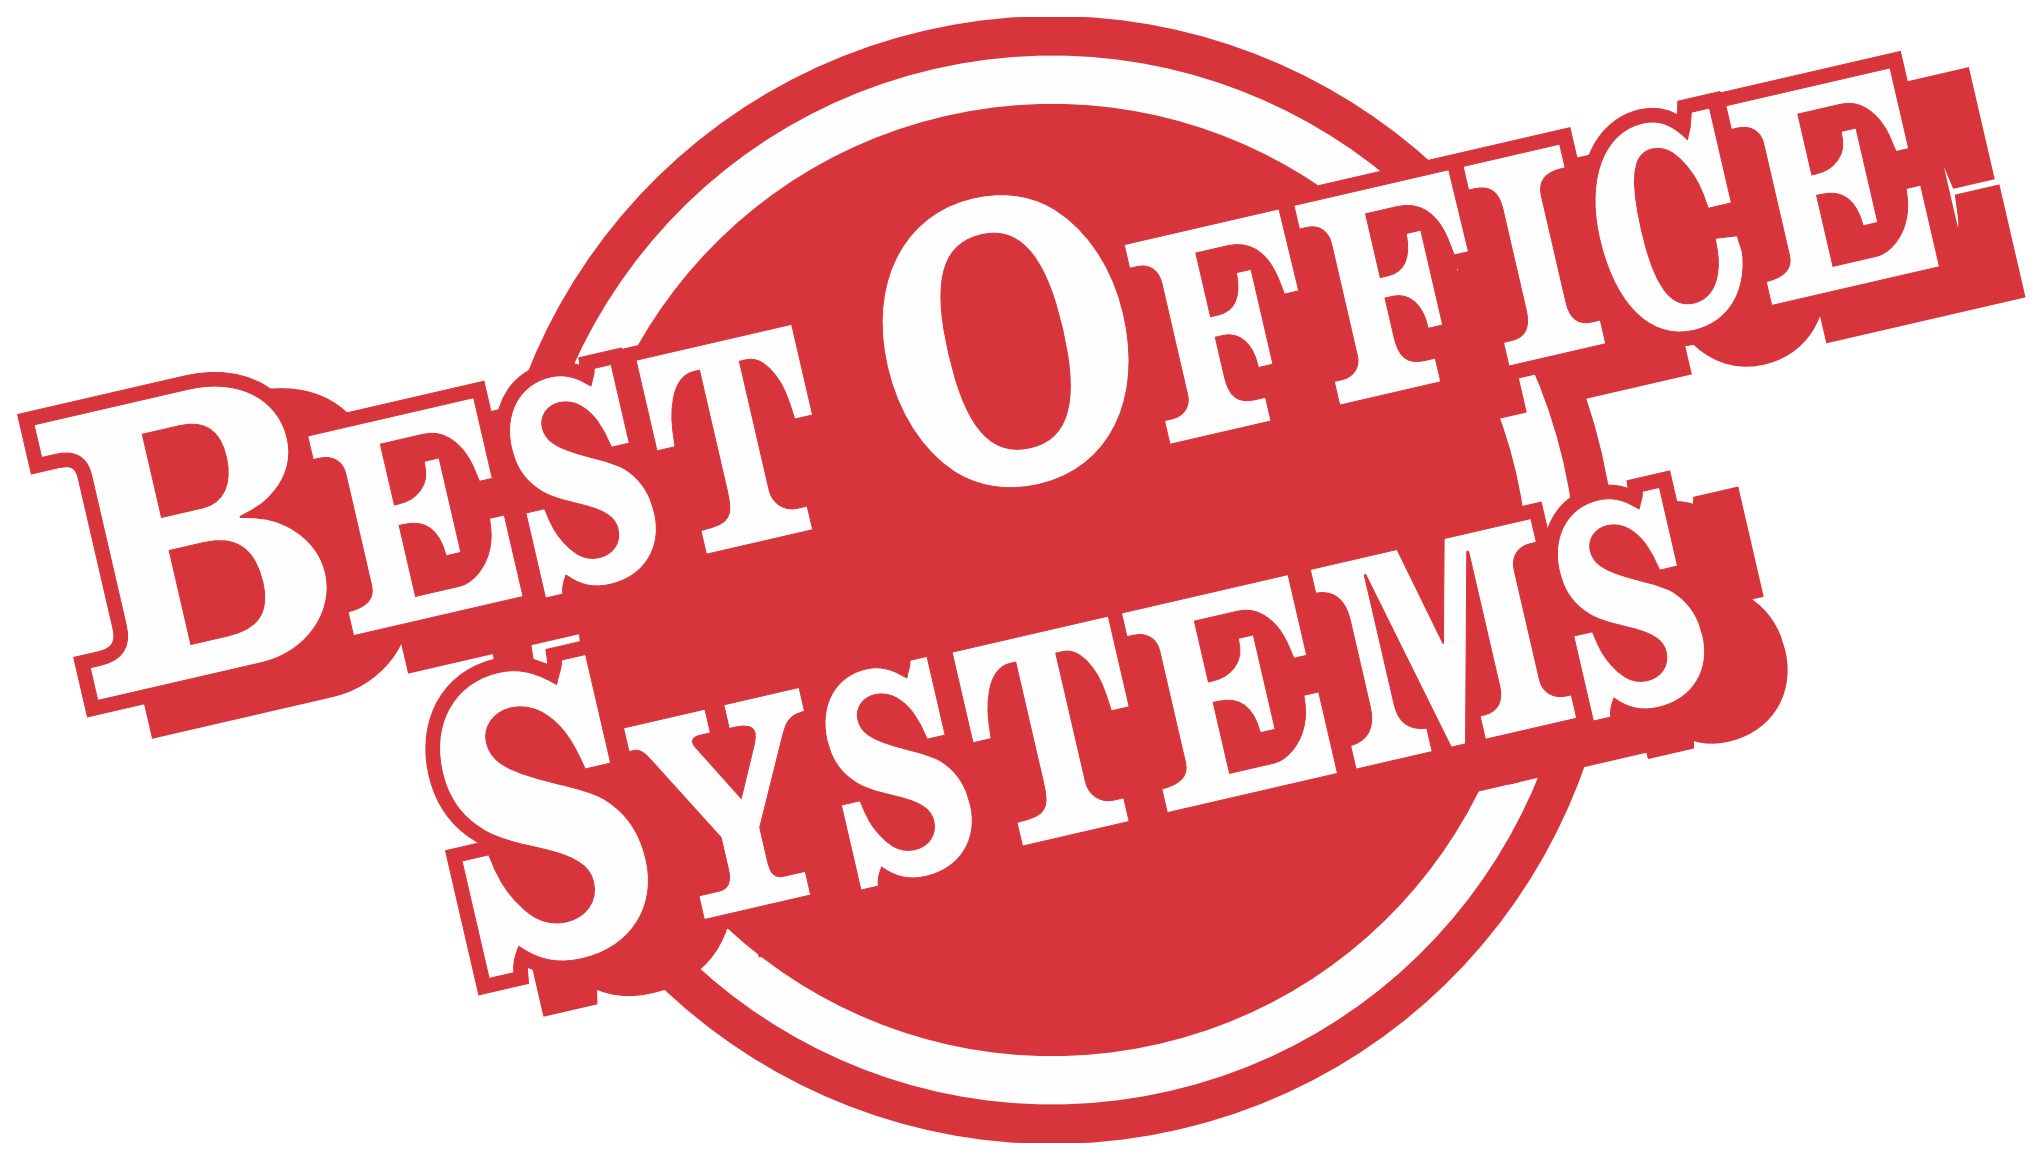 Best Office Systems Logo